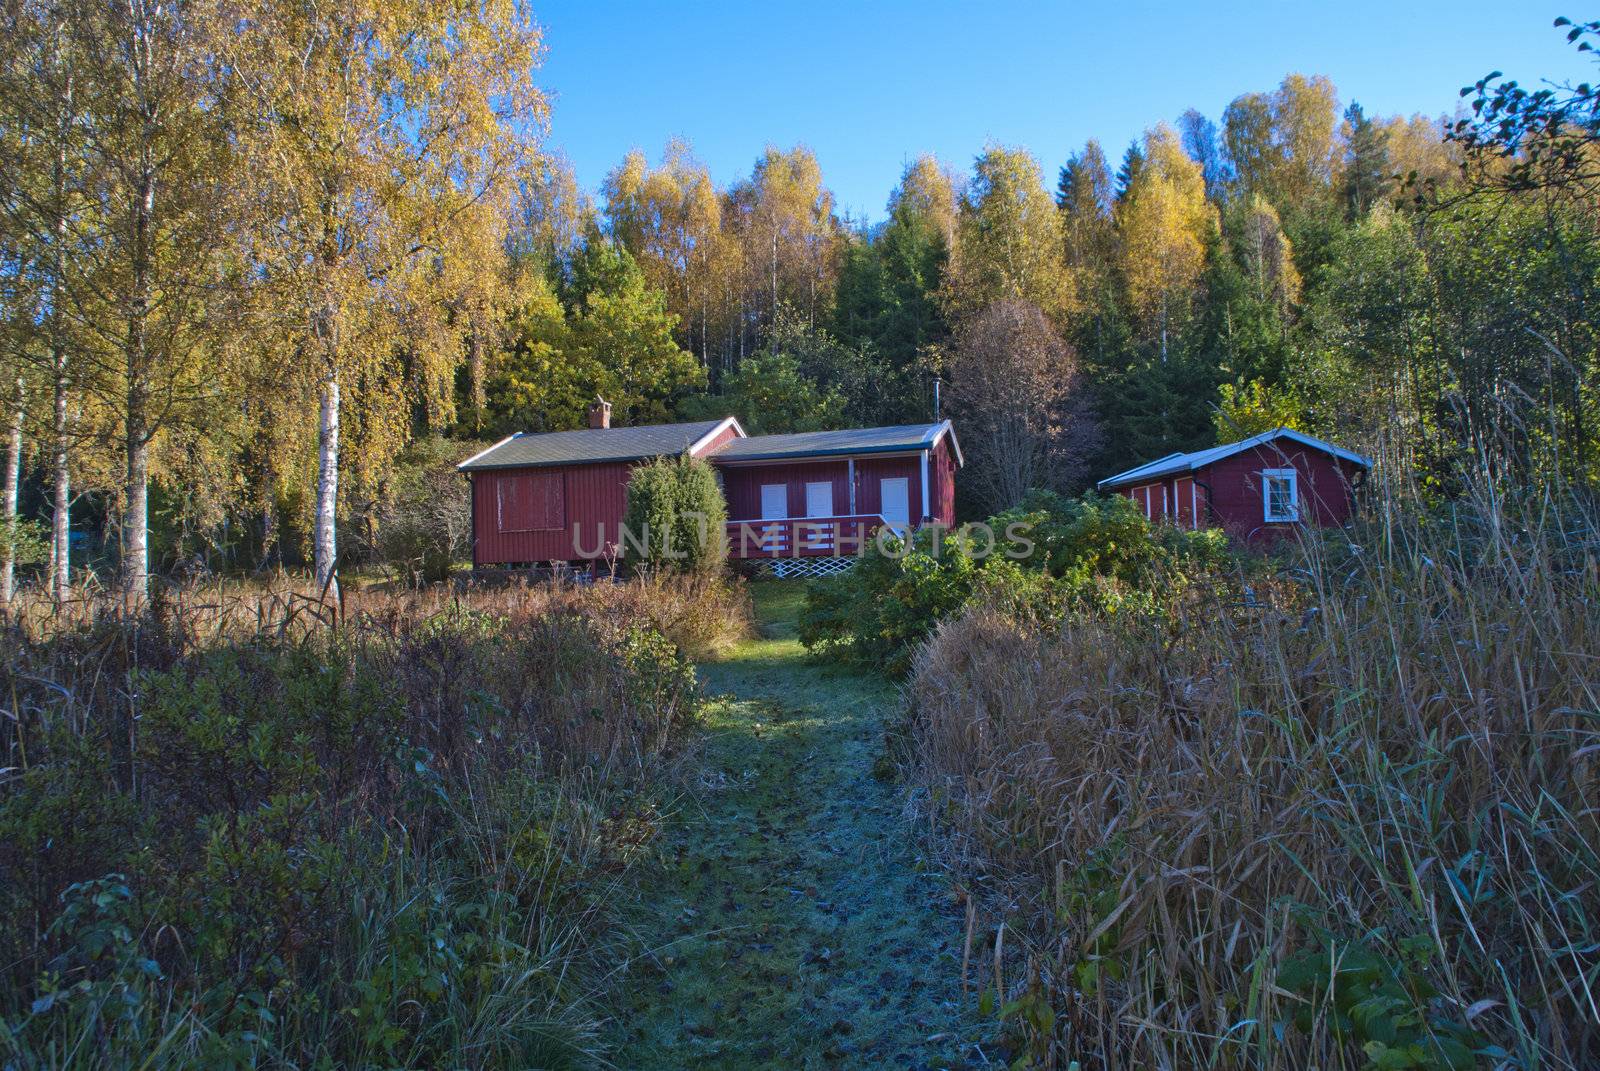 a cozy little red cabin situated close to the  iddefjord at bakke in halden municipality, the cabin has its own small beach 20 meters from the cabin wall, picture is shot in october 2012